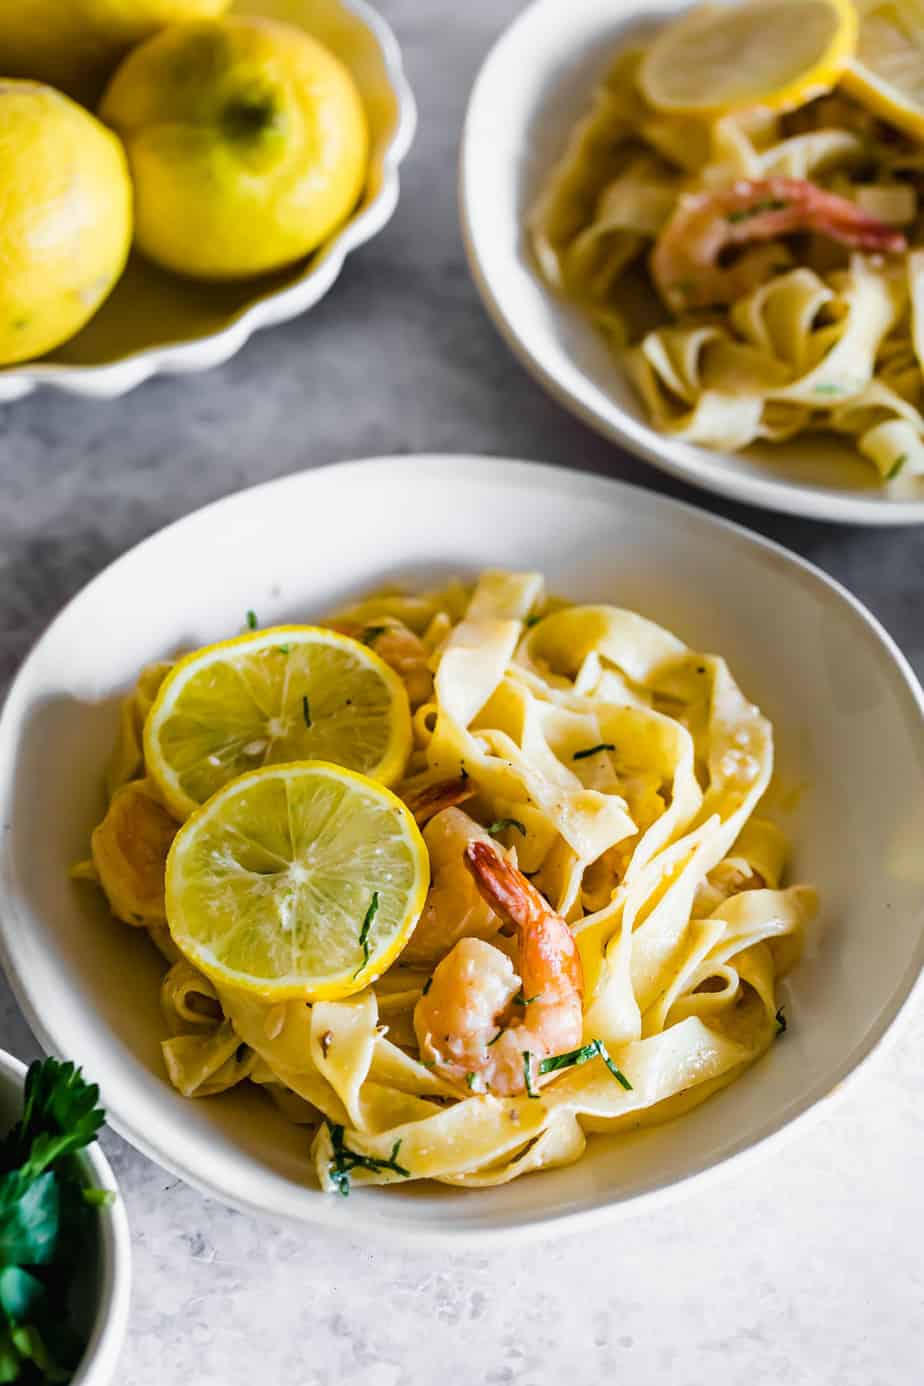 Creamy shrimp pasta served in a white bowl with fresh lemon slices and parsley.